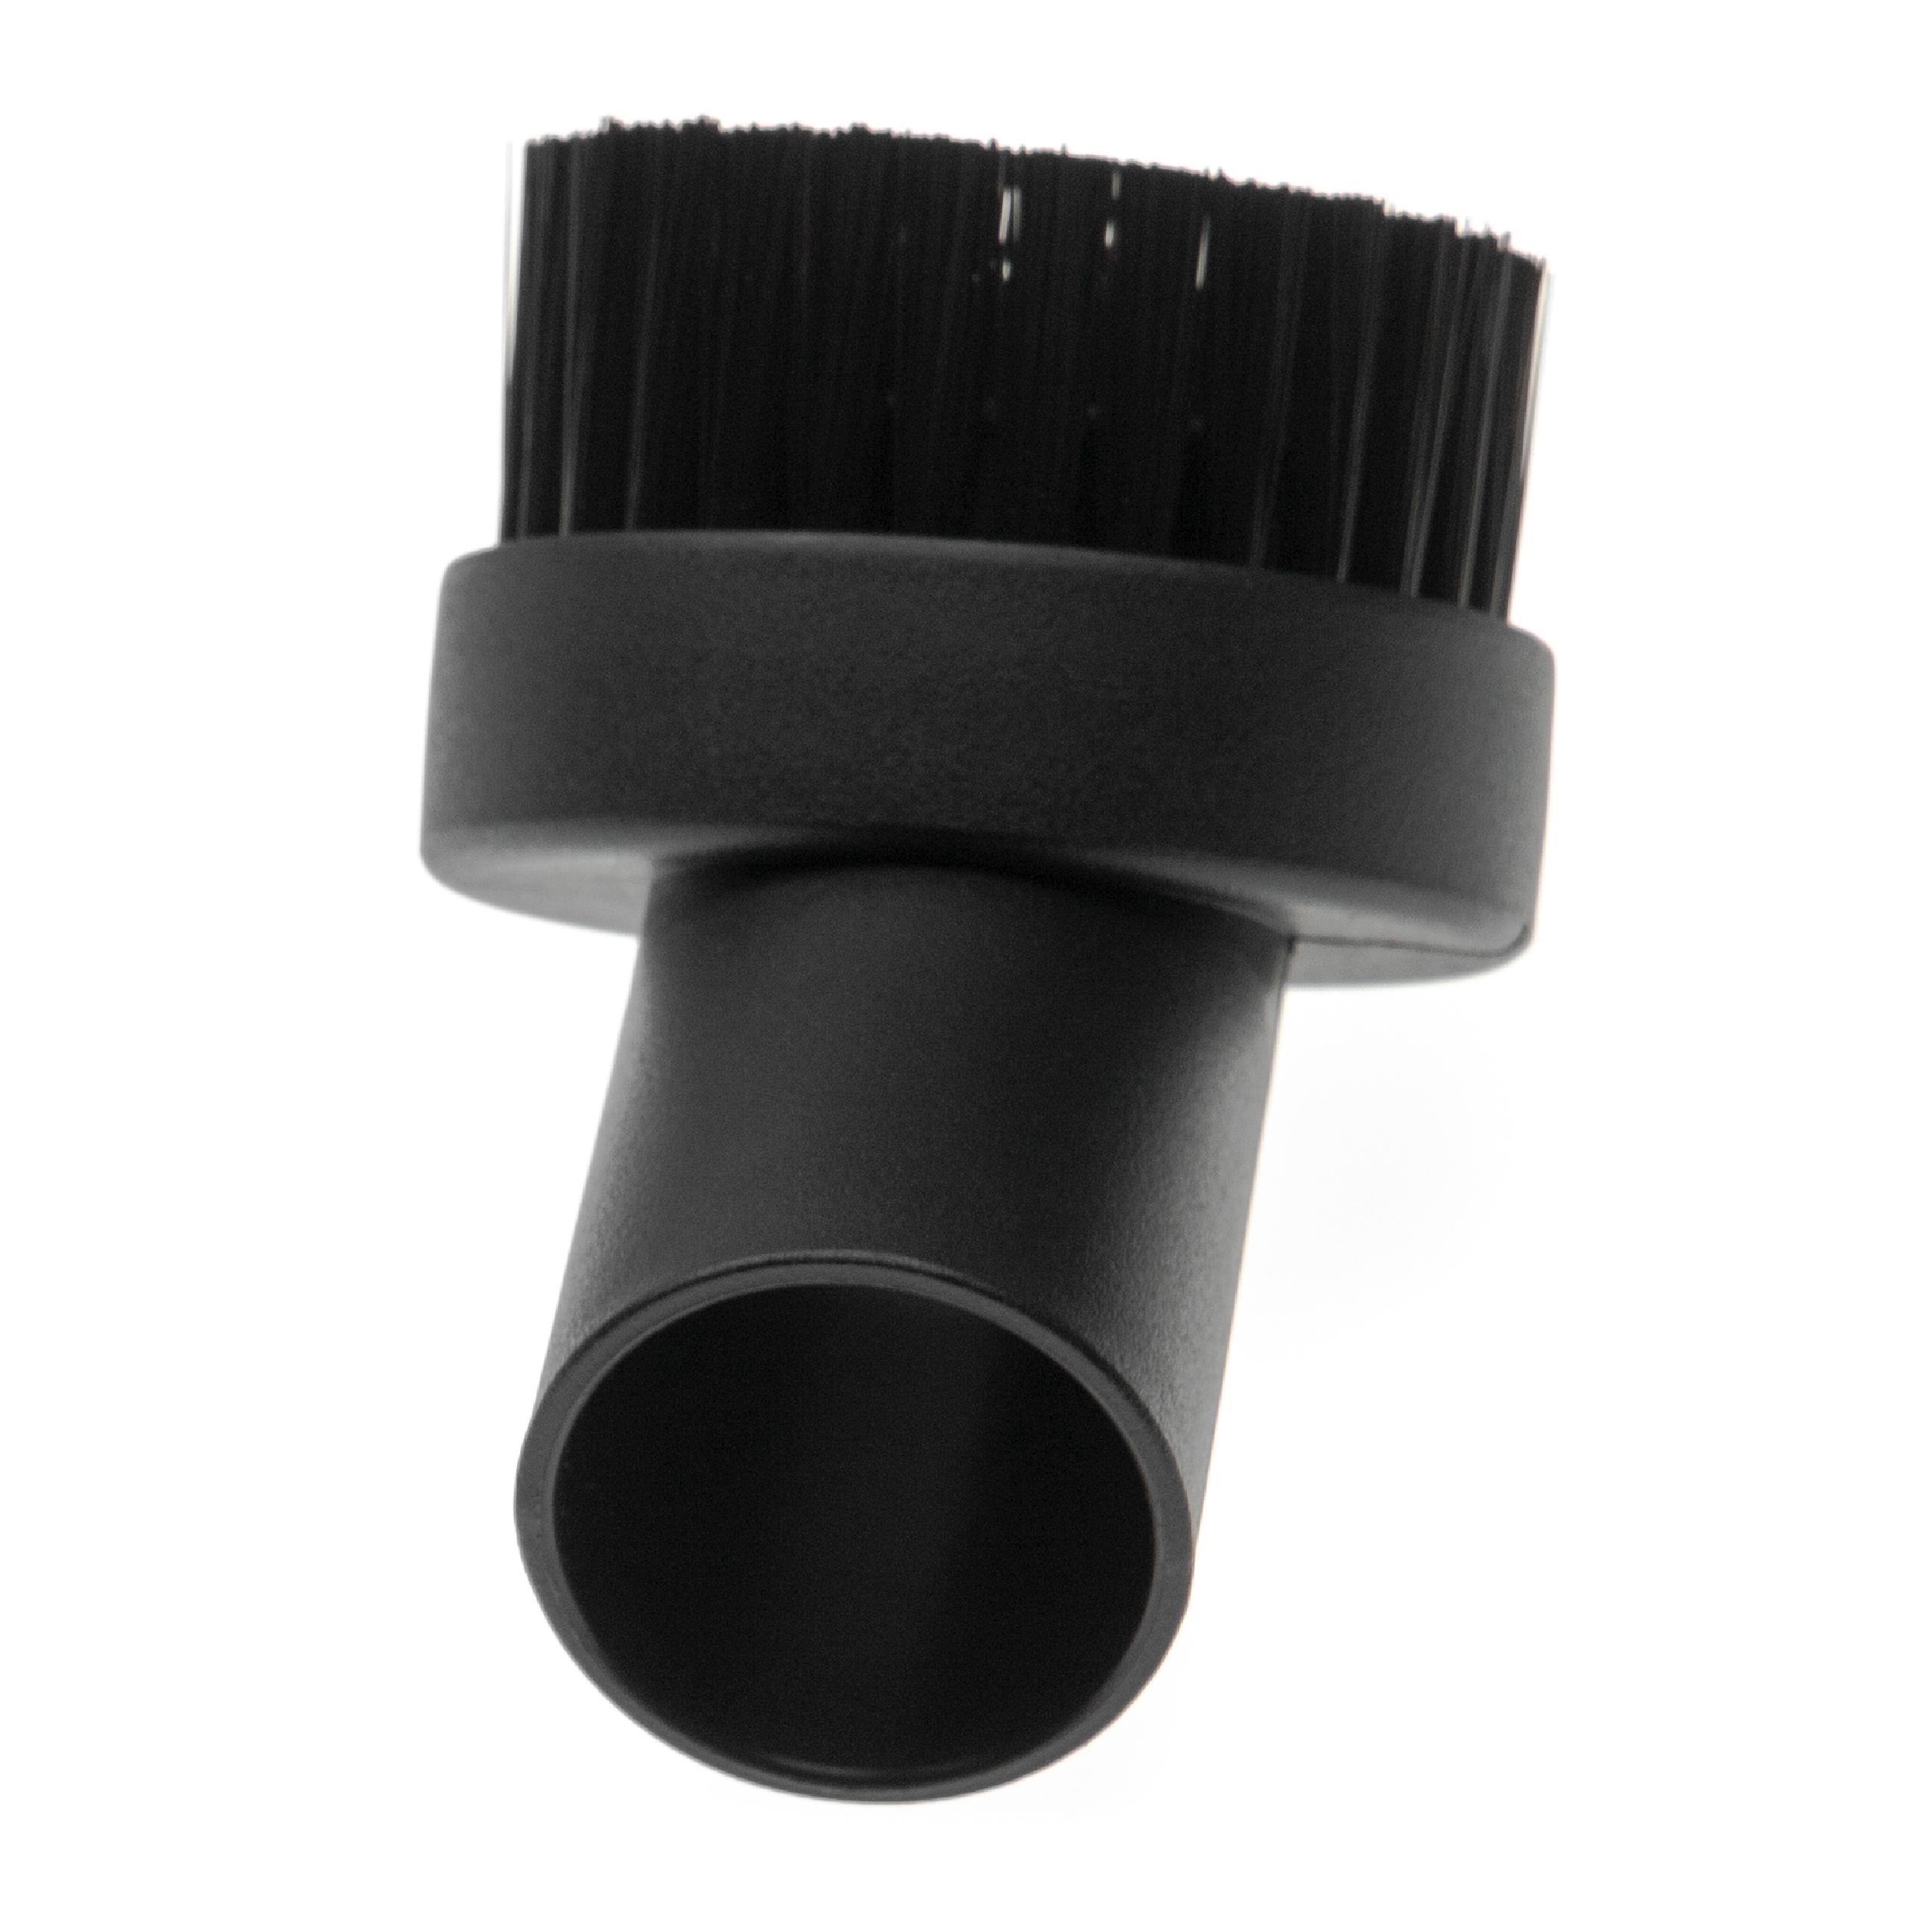  Brush Nozzle 32 mm Connector for Vacuum Cleaner - Furniture Brush with Bristles